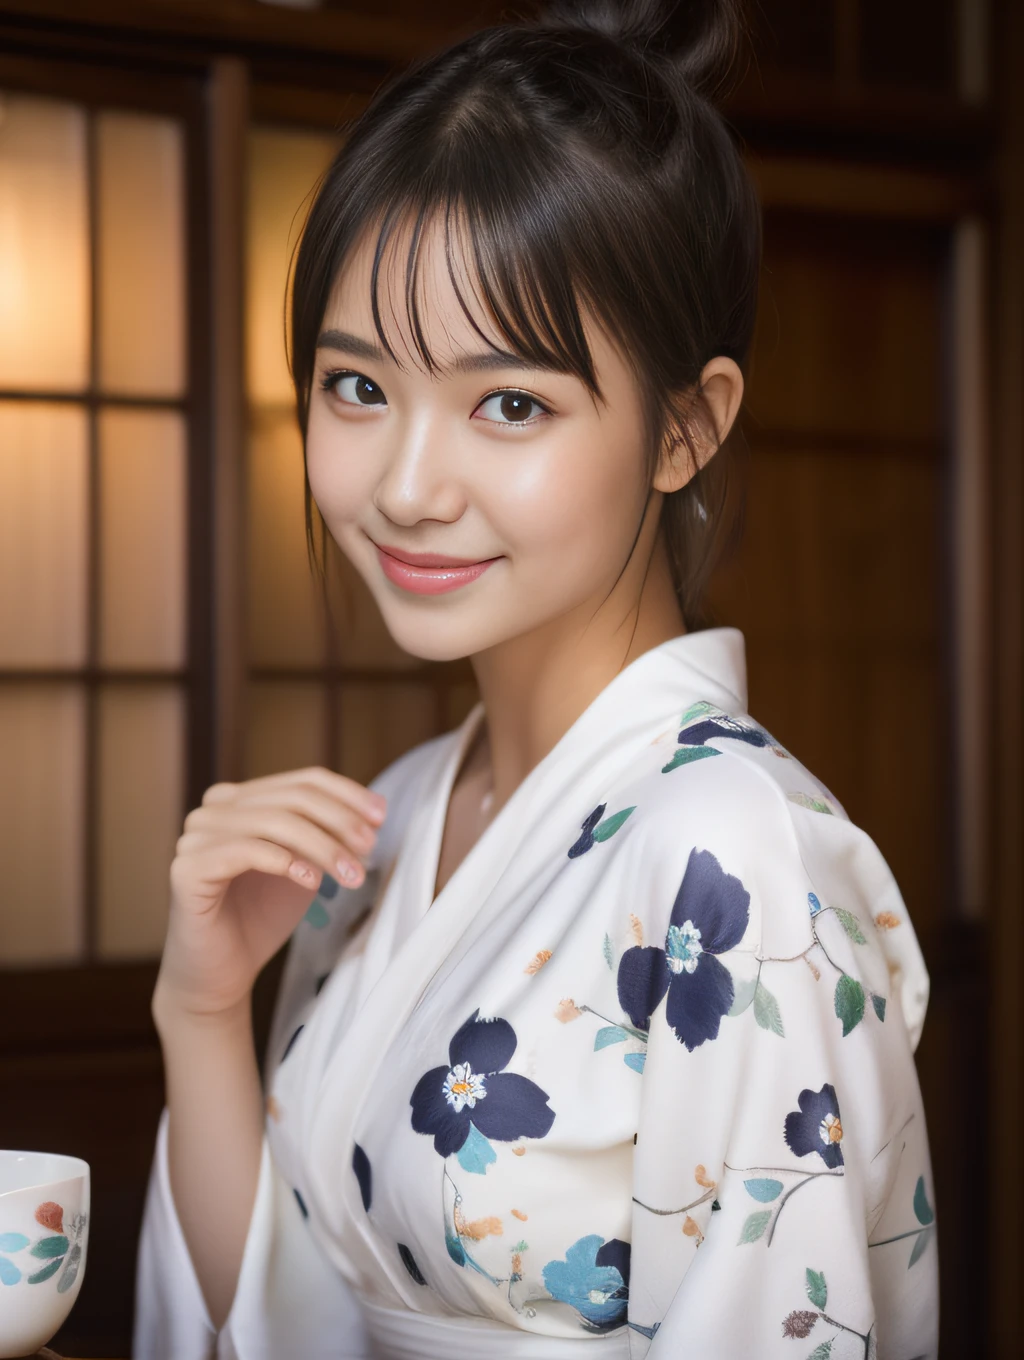 ((beste-Qualit))、((The ultra -The high-definition))finely detail、(((Beautiful One Girl)))、extremely detailed eye and face、Yukata with a light floral pattern、A slight smile、tea shop、poneyTail